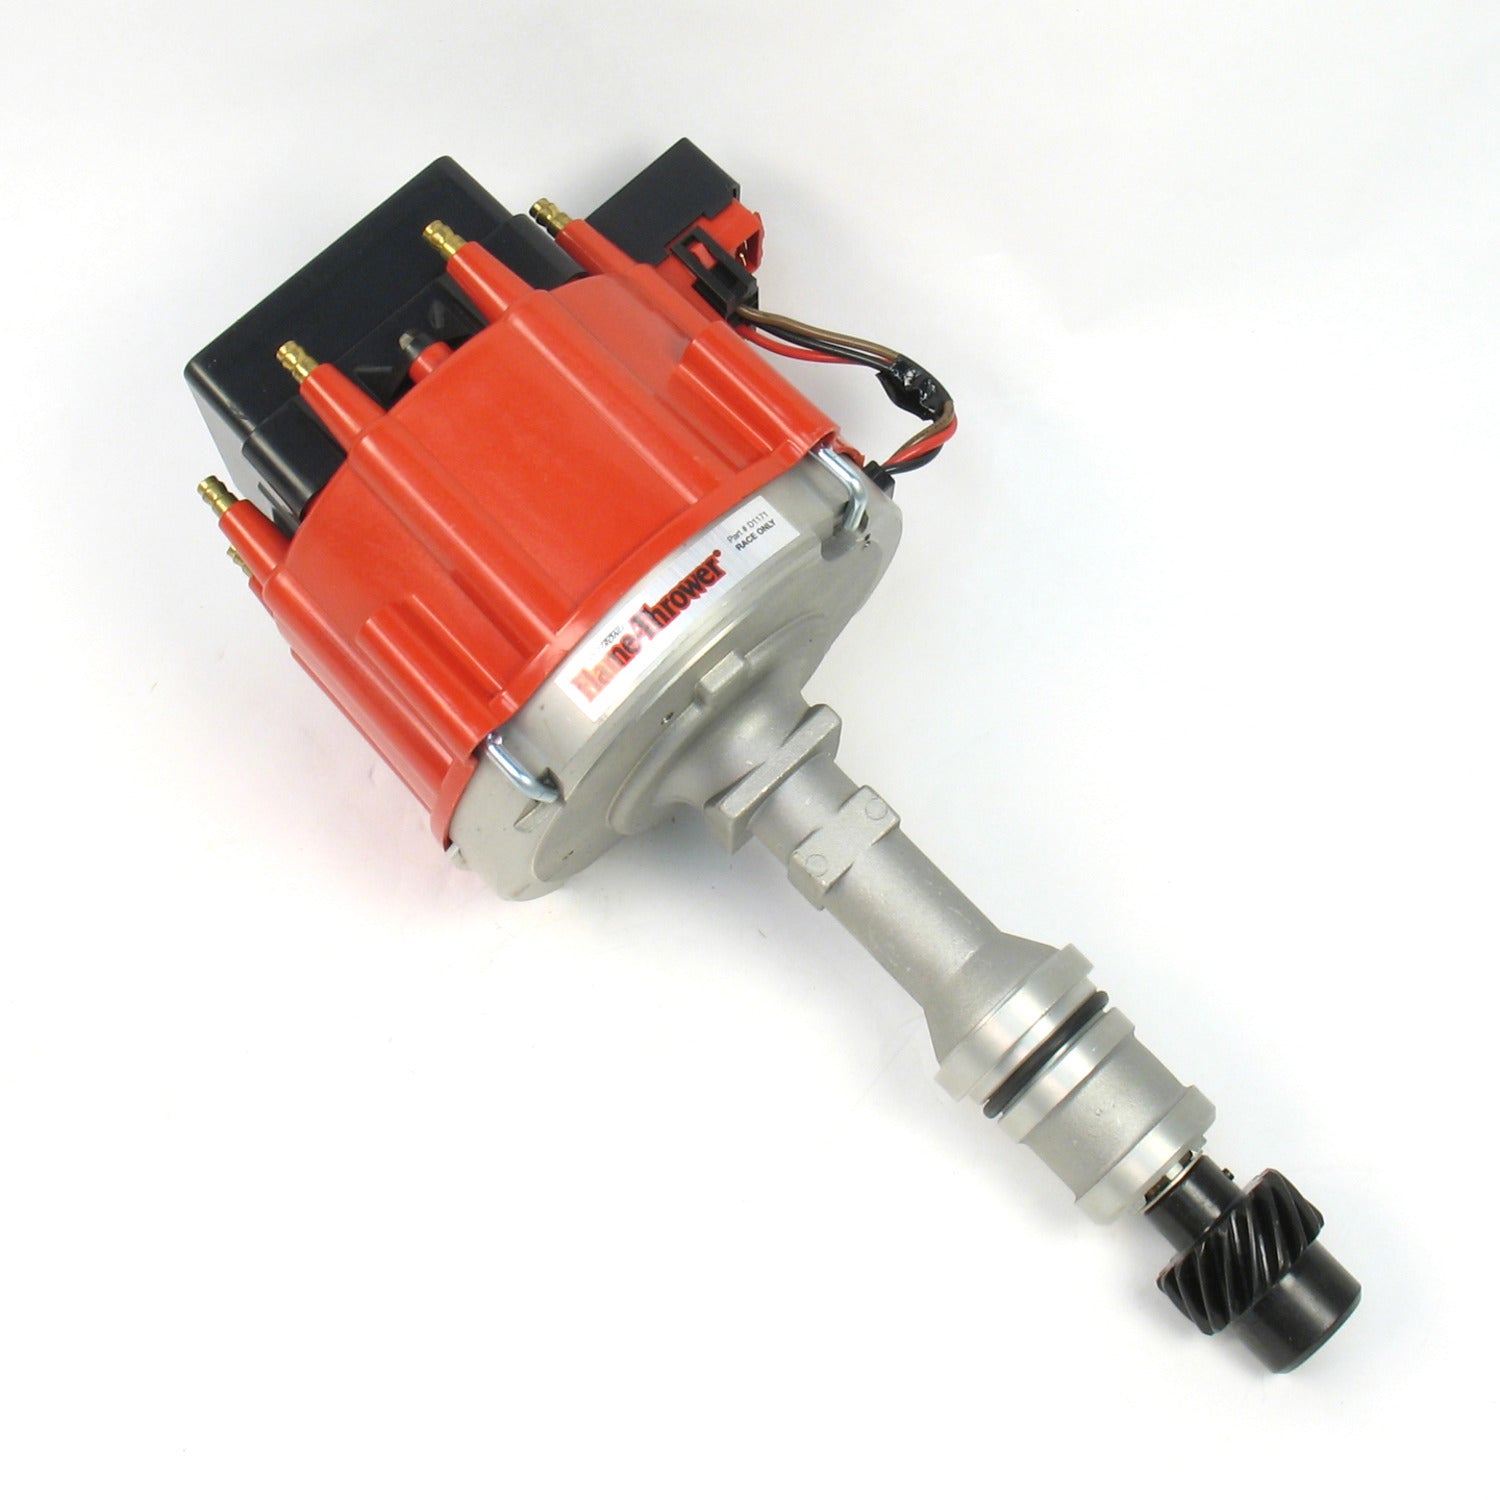 PerTronix D1171 Flame-Thrower Race Distributor HEI Oldsmobile 260-455 Red Cap